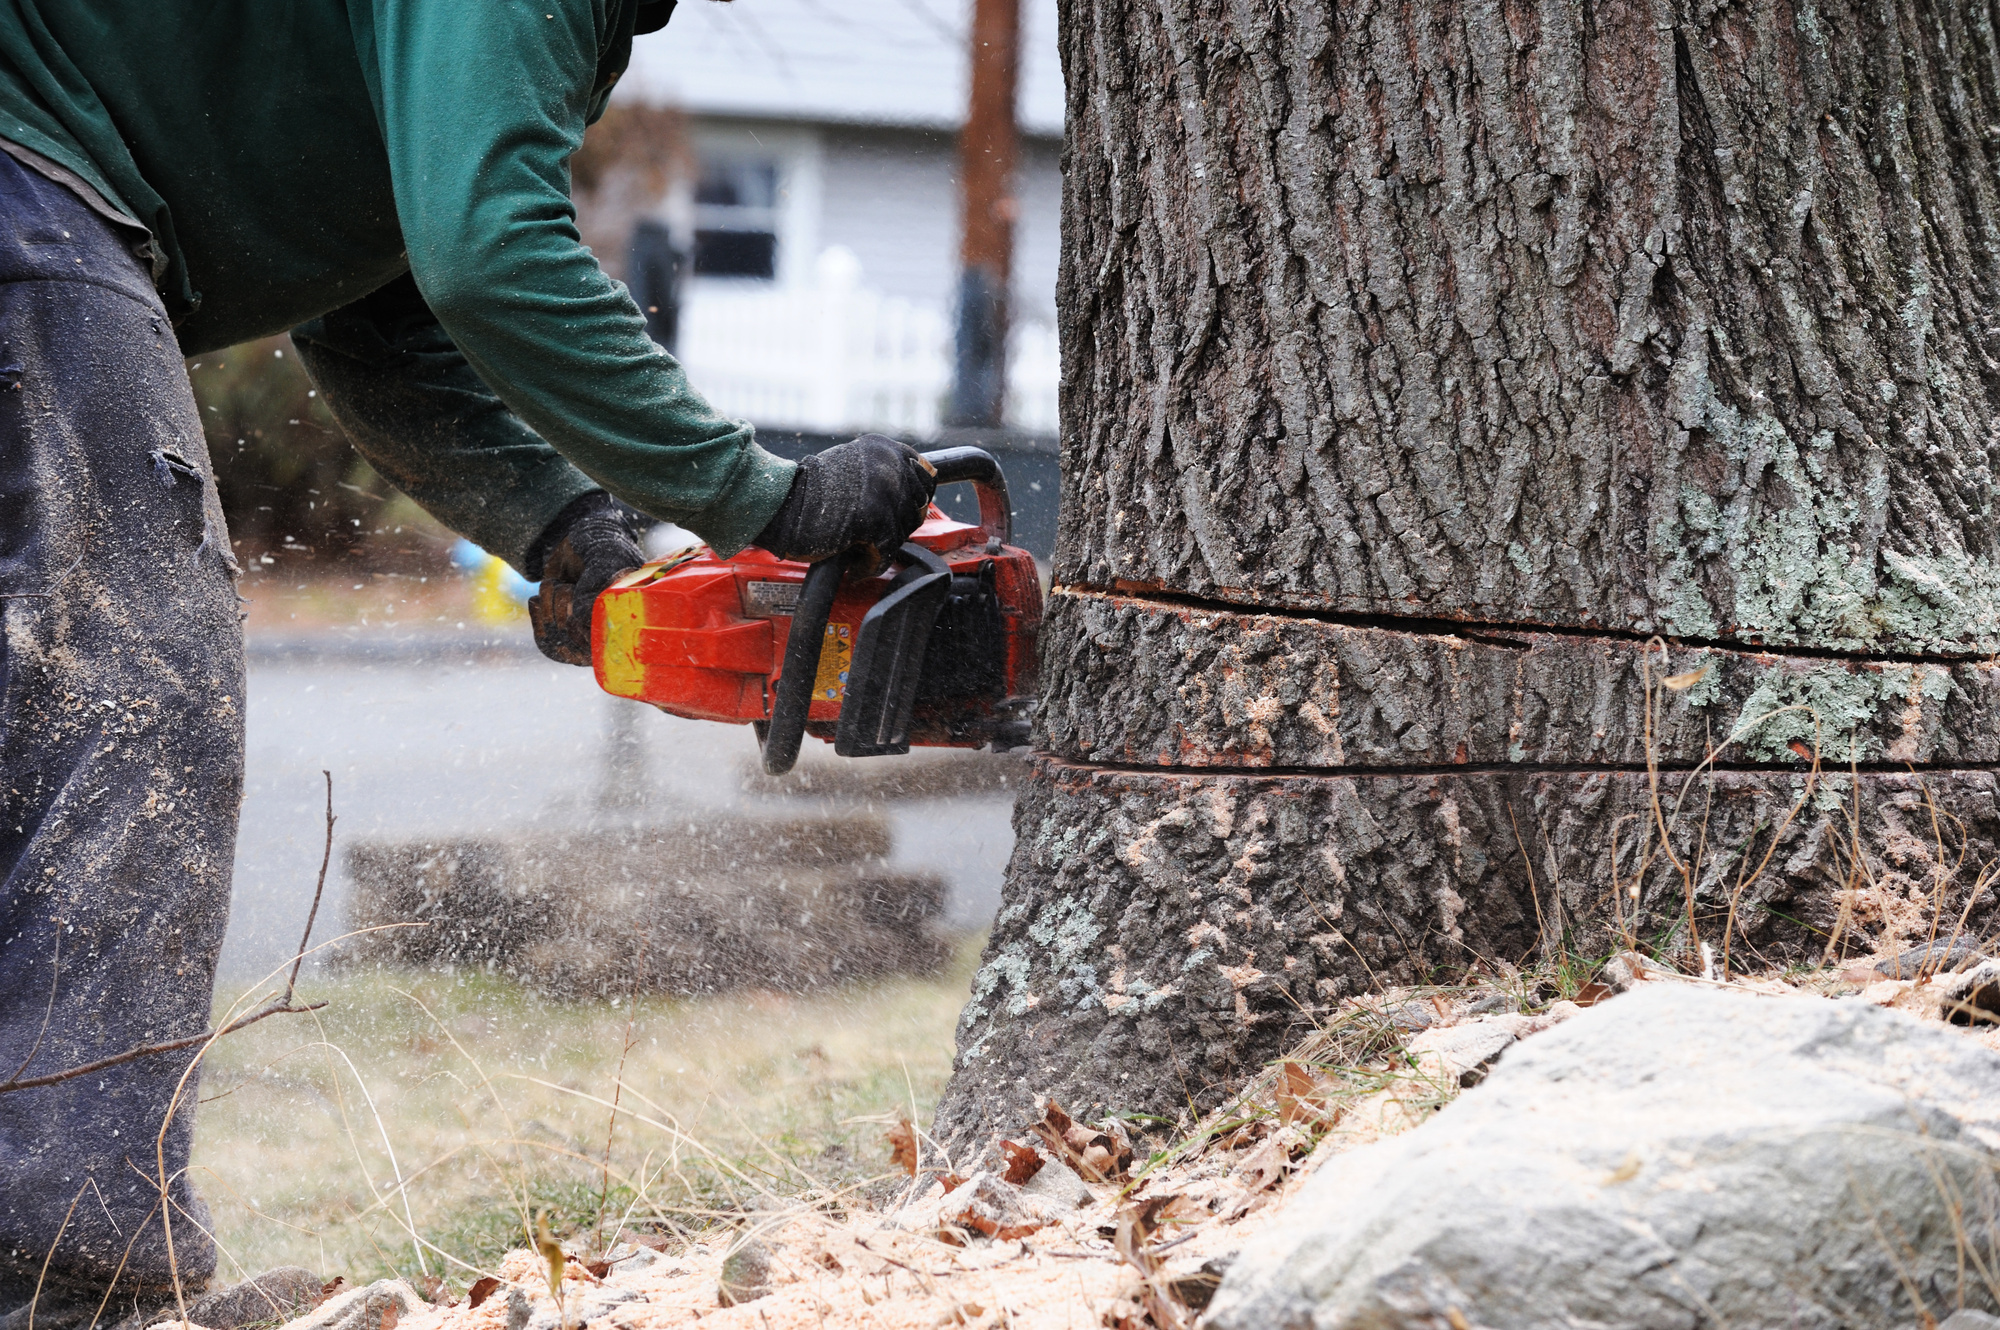 Finding the right professional to remove a tree on your property requires knowing your options. This guide explains what to know about hiring a tree service.